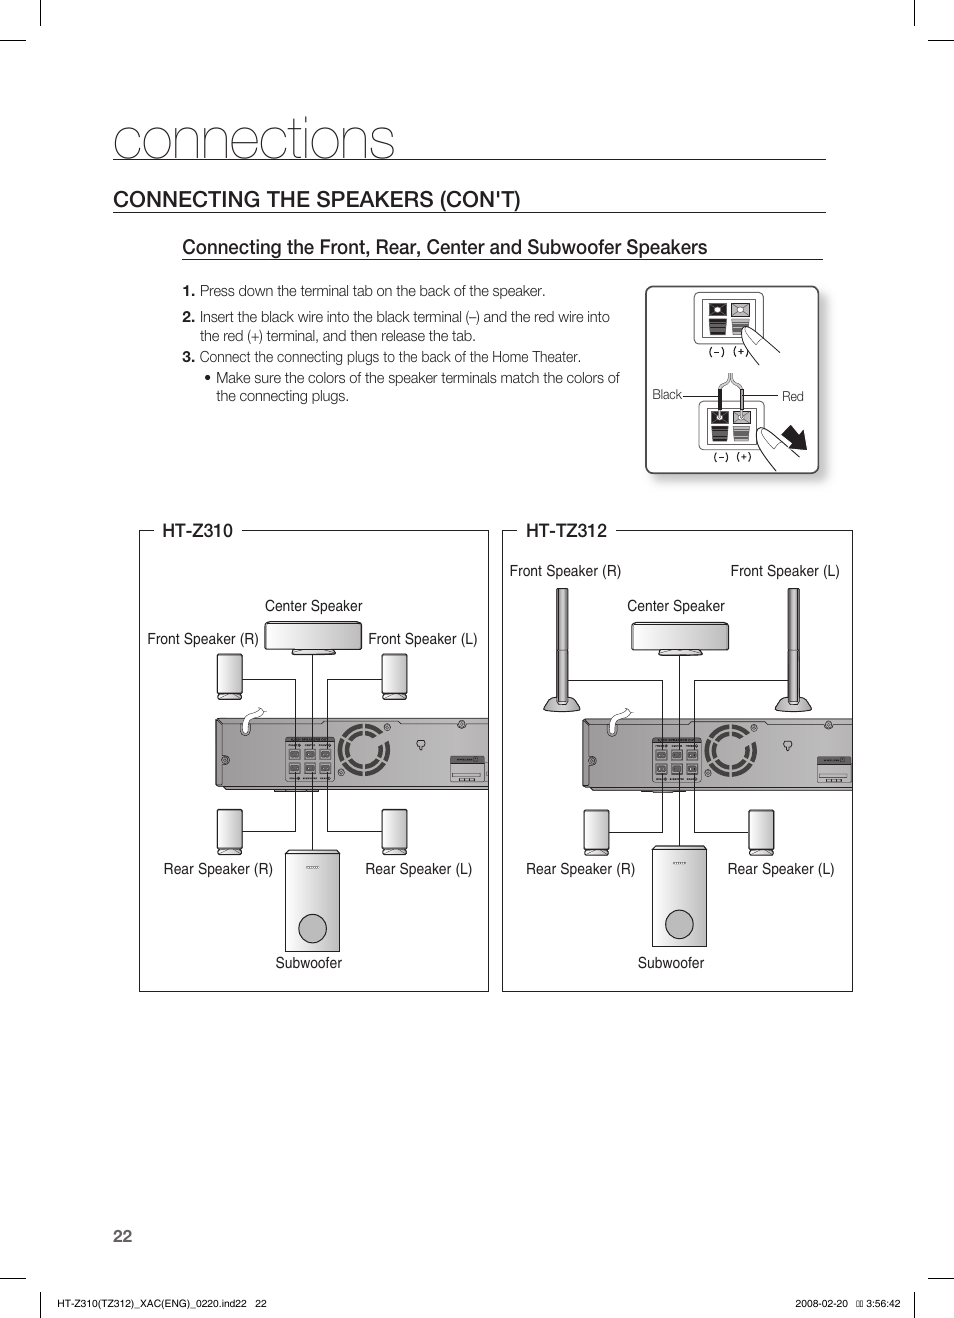 Connections, Connecting the speakers (con't) | Samsung HT-Z310 User Manual  | Page 23 / 72